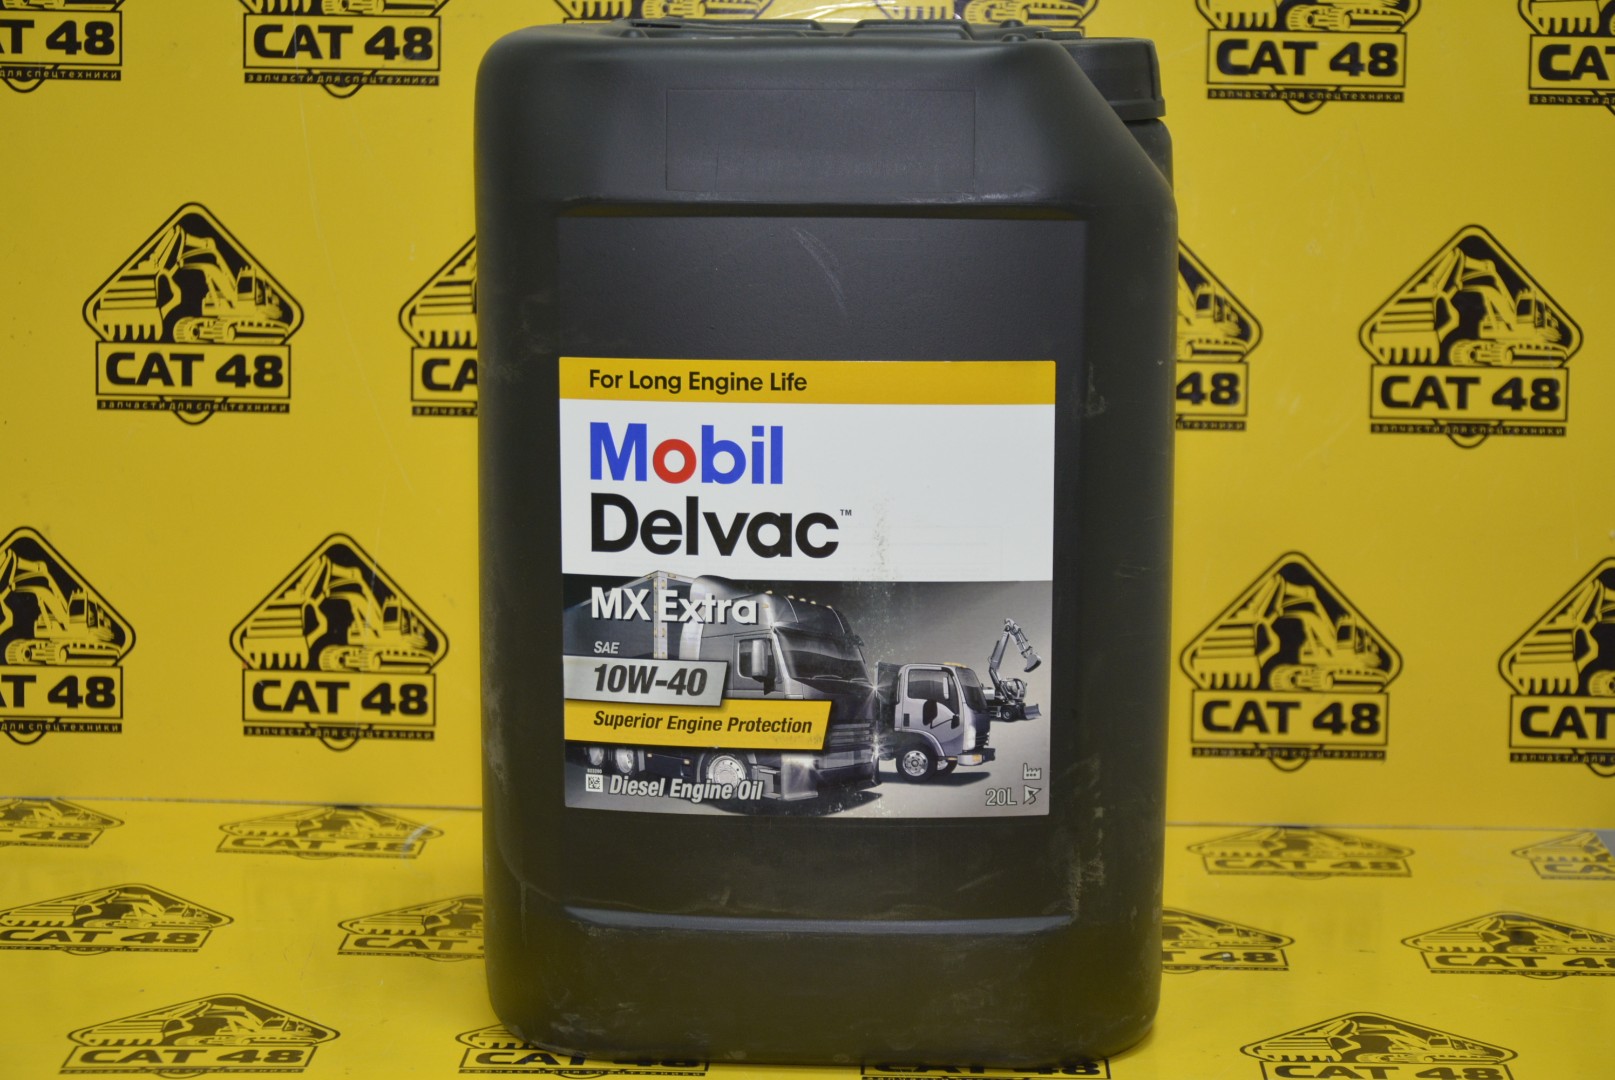 Масло mobil extra. Mobil Delvac MX Extra 10w-40 20. Mobil Delvac 10w 40 Diesel 20л. Масло моторное мобил Делвак МХ Экстра 10w 40. Mobil масло Delvac MX Extra 10w40 20л.